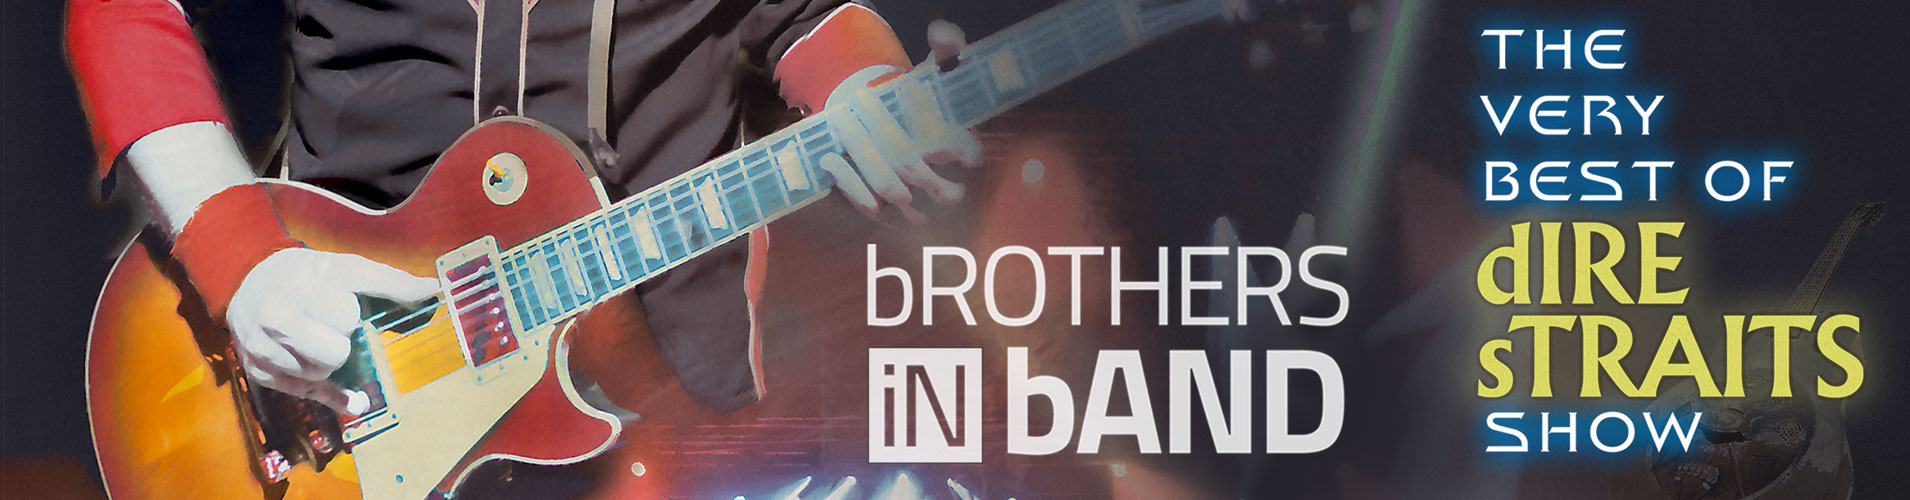 1090x500-Brothers-In-Band.jpg